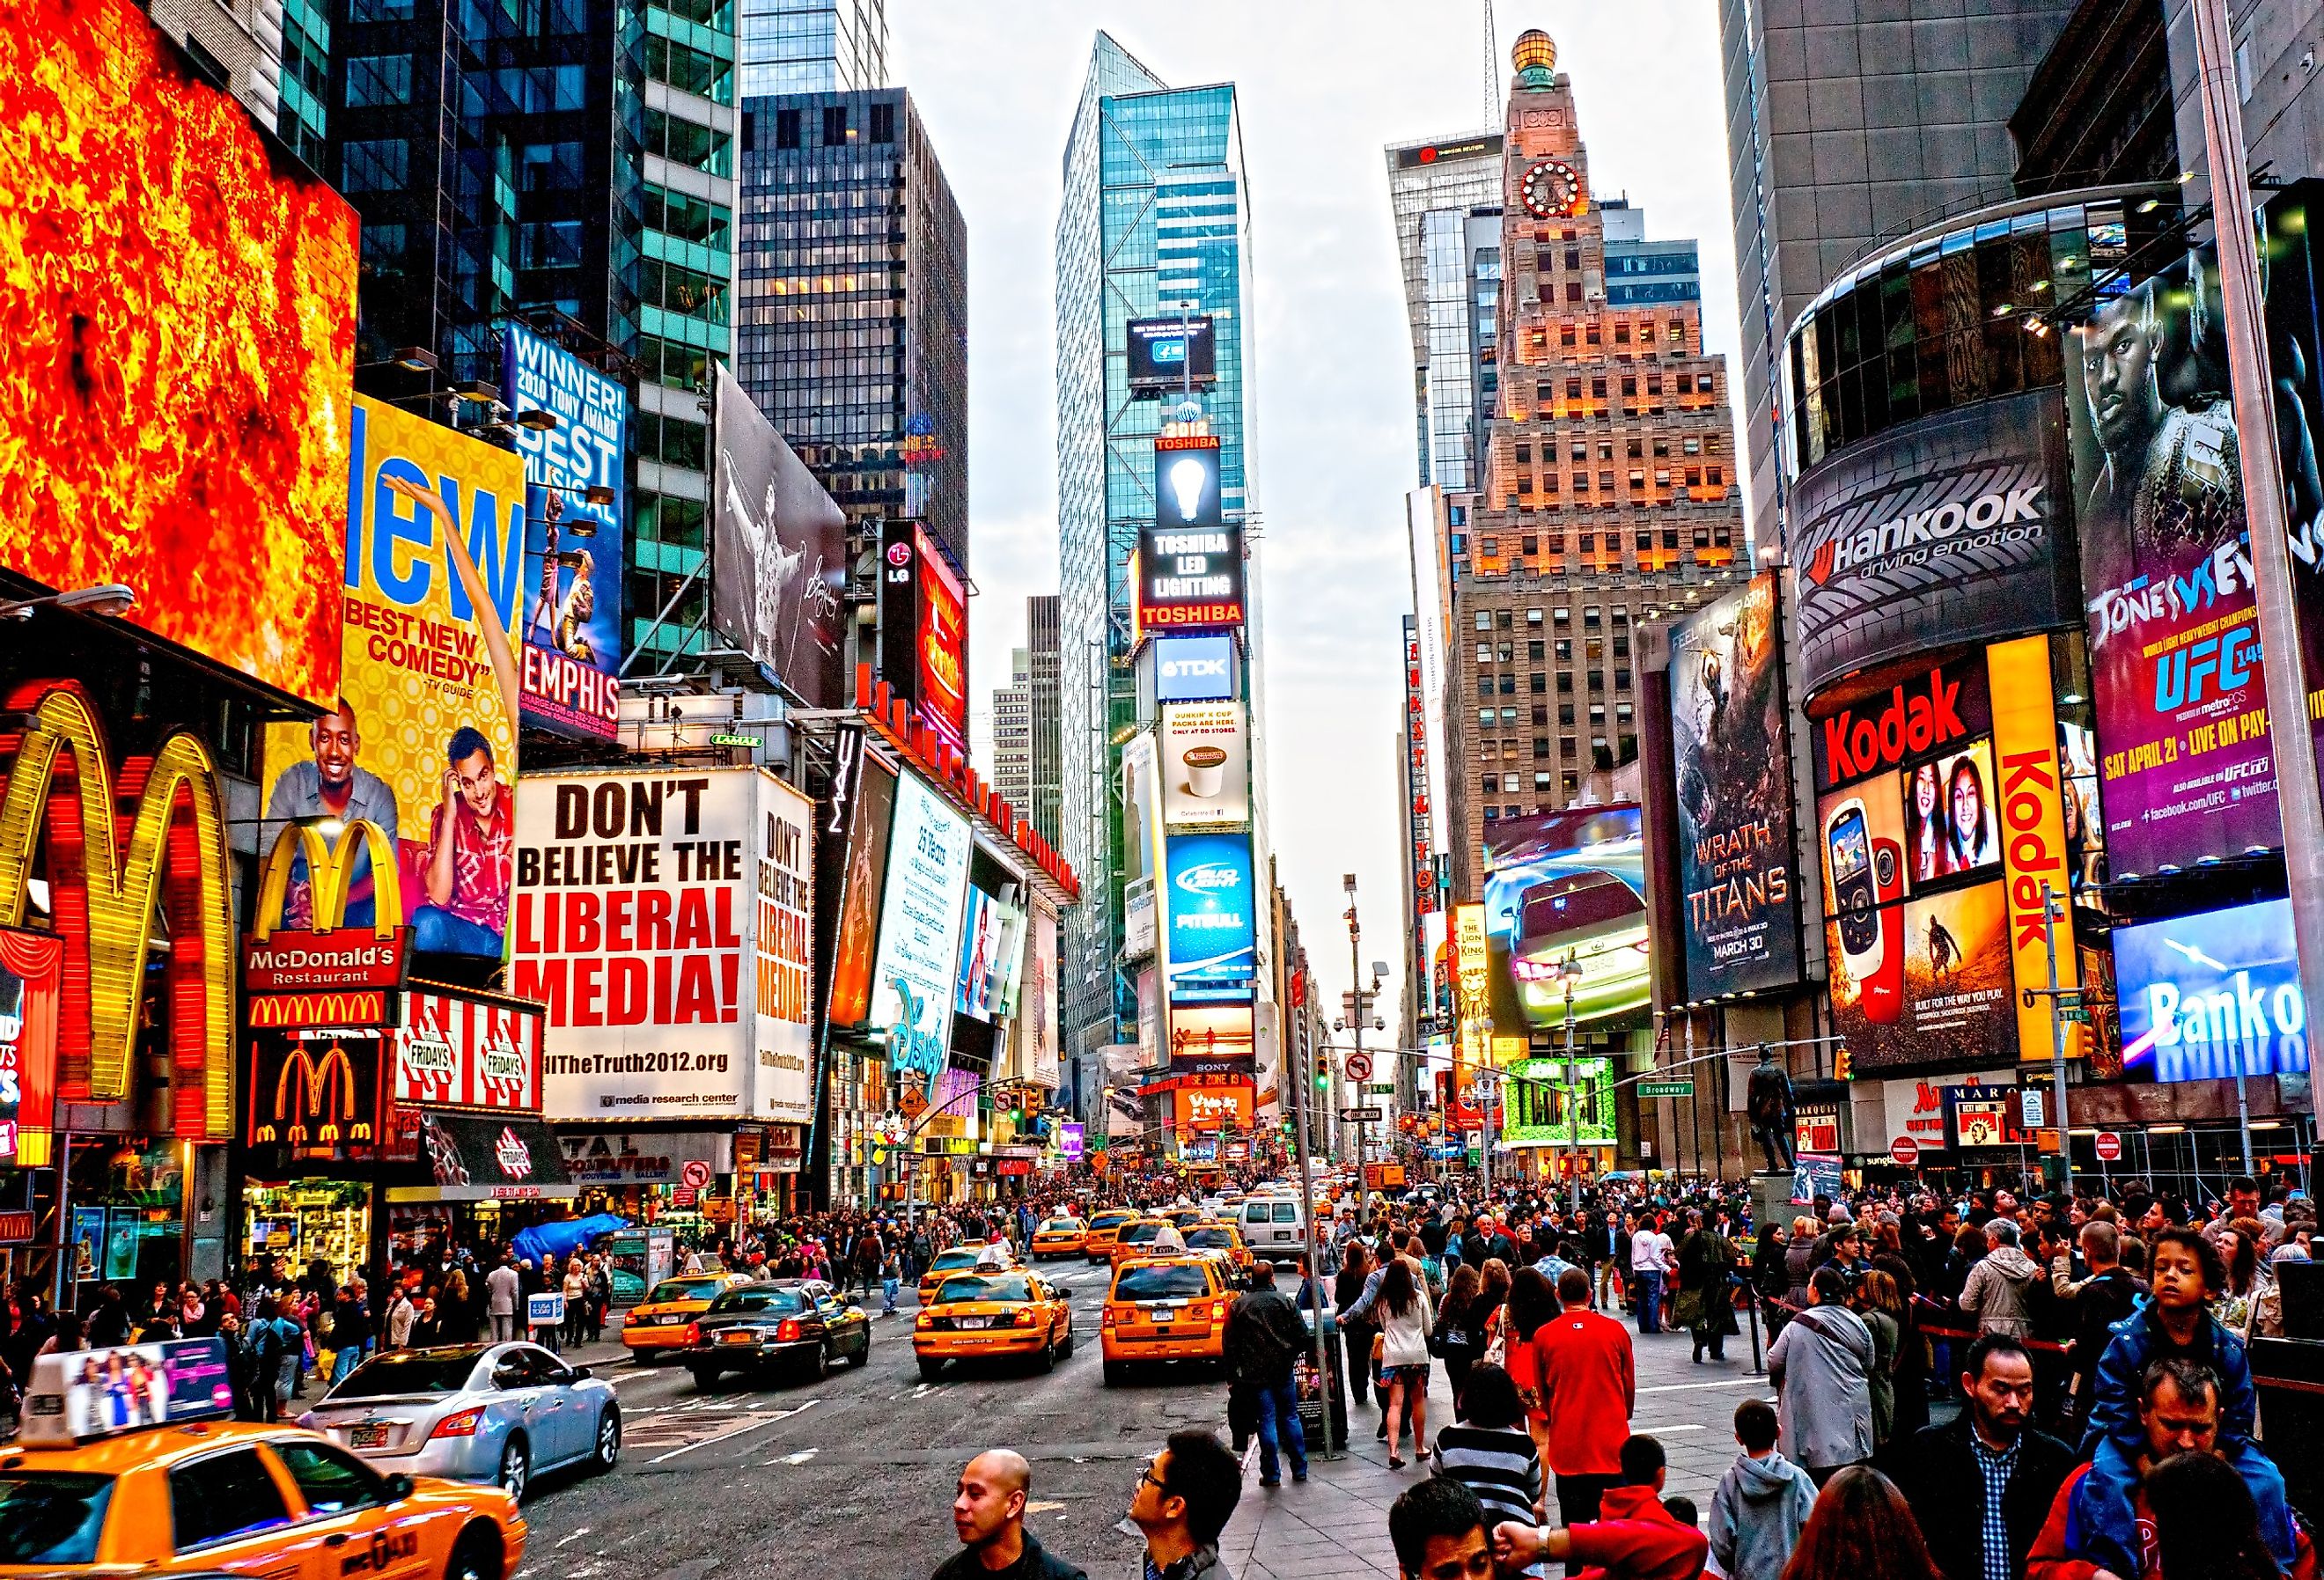 Times Square, featured with Broadway Theaters and animated LED signs in Manhattan, New York City. Image credit Luciano Mortula - LGM via Shutterstock